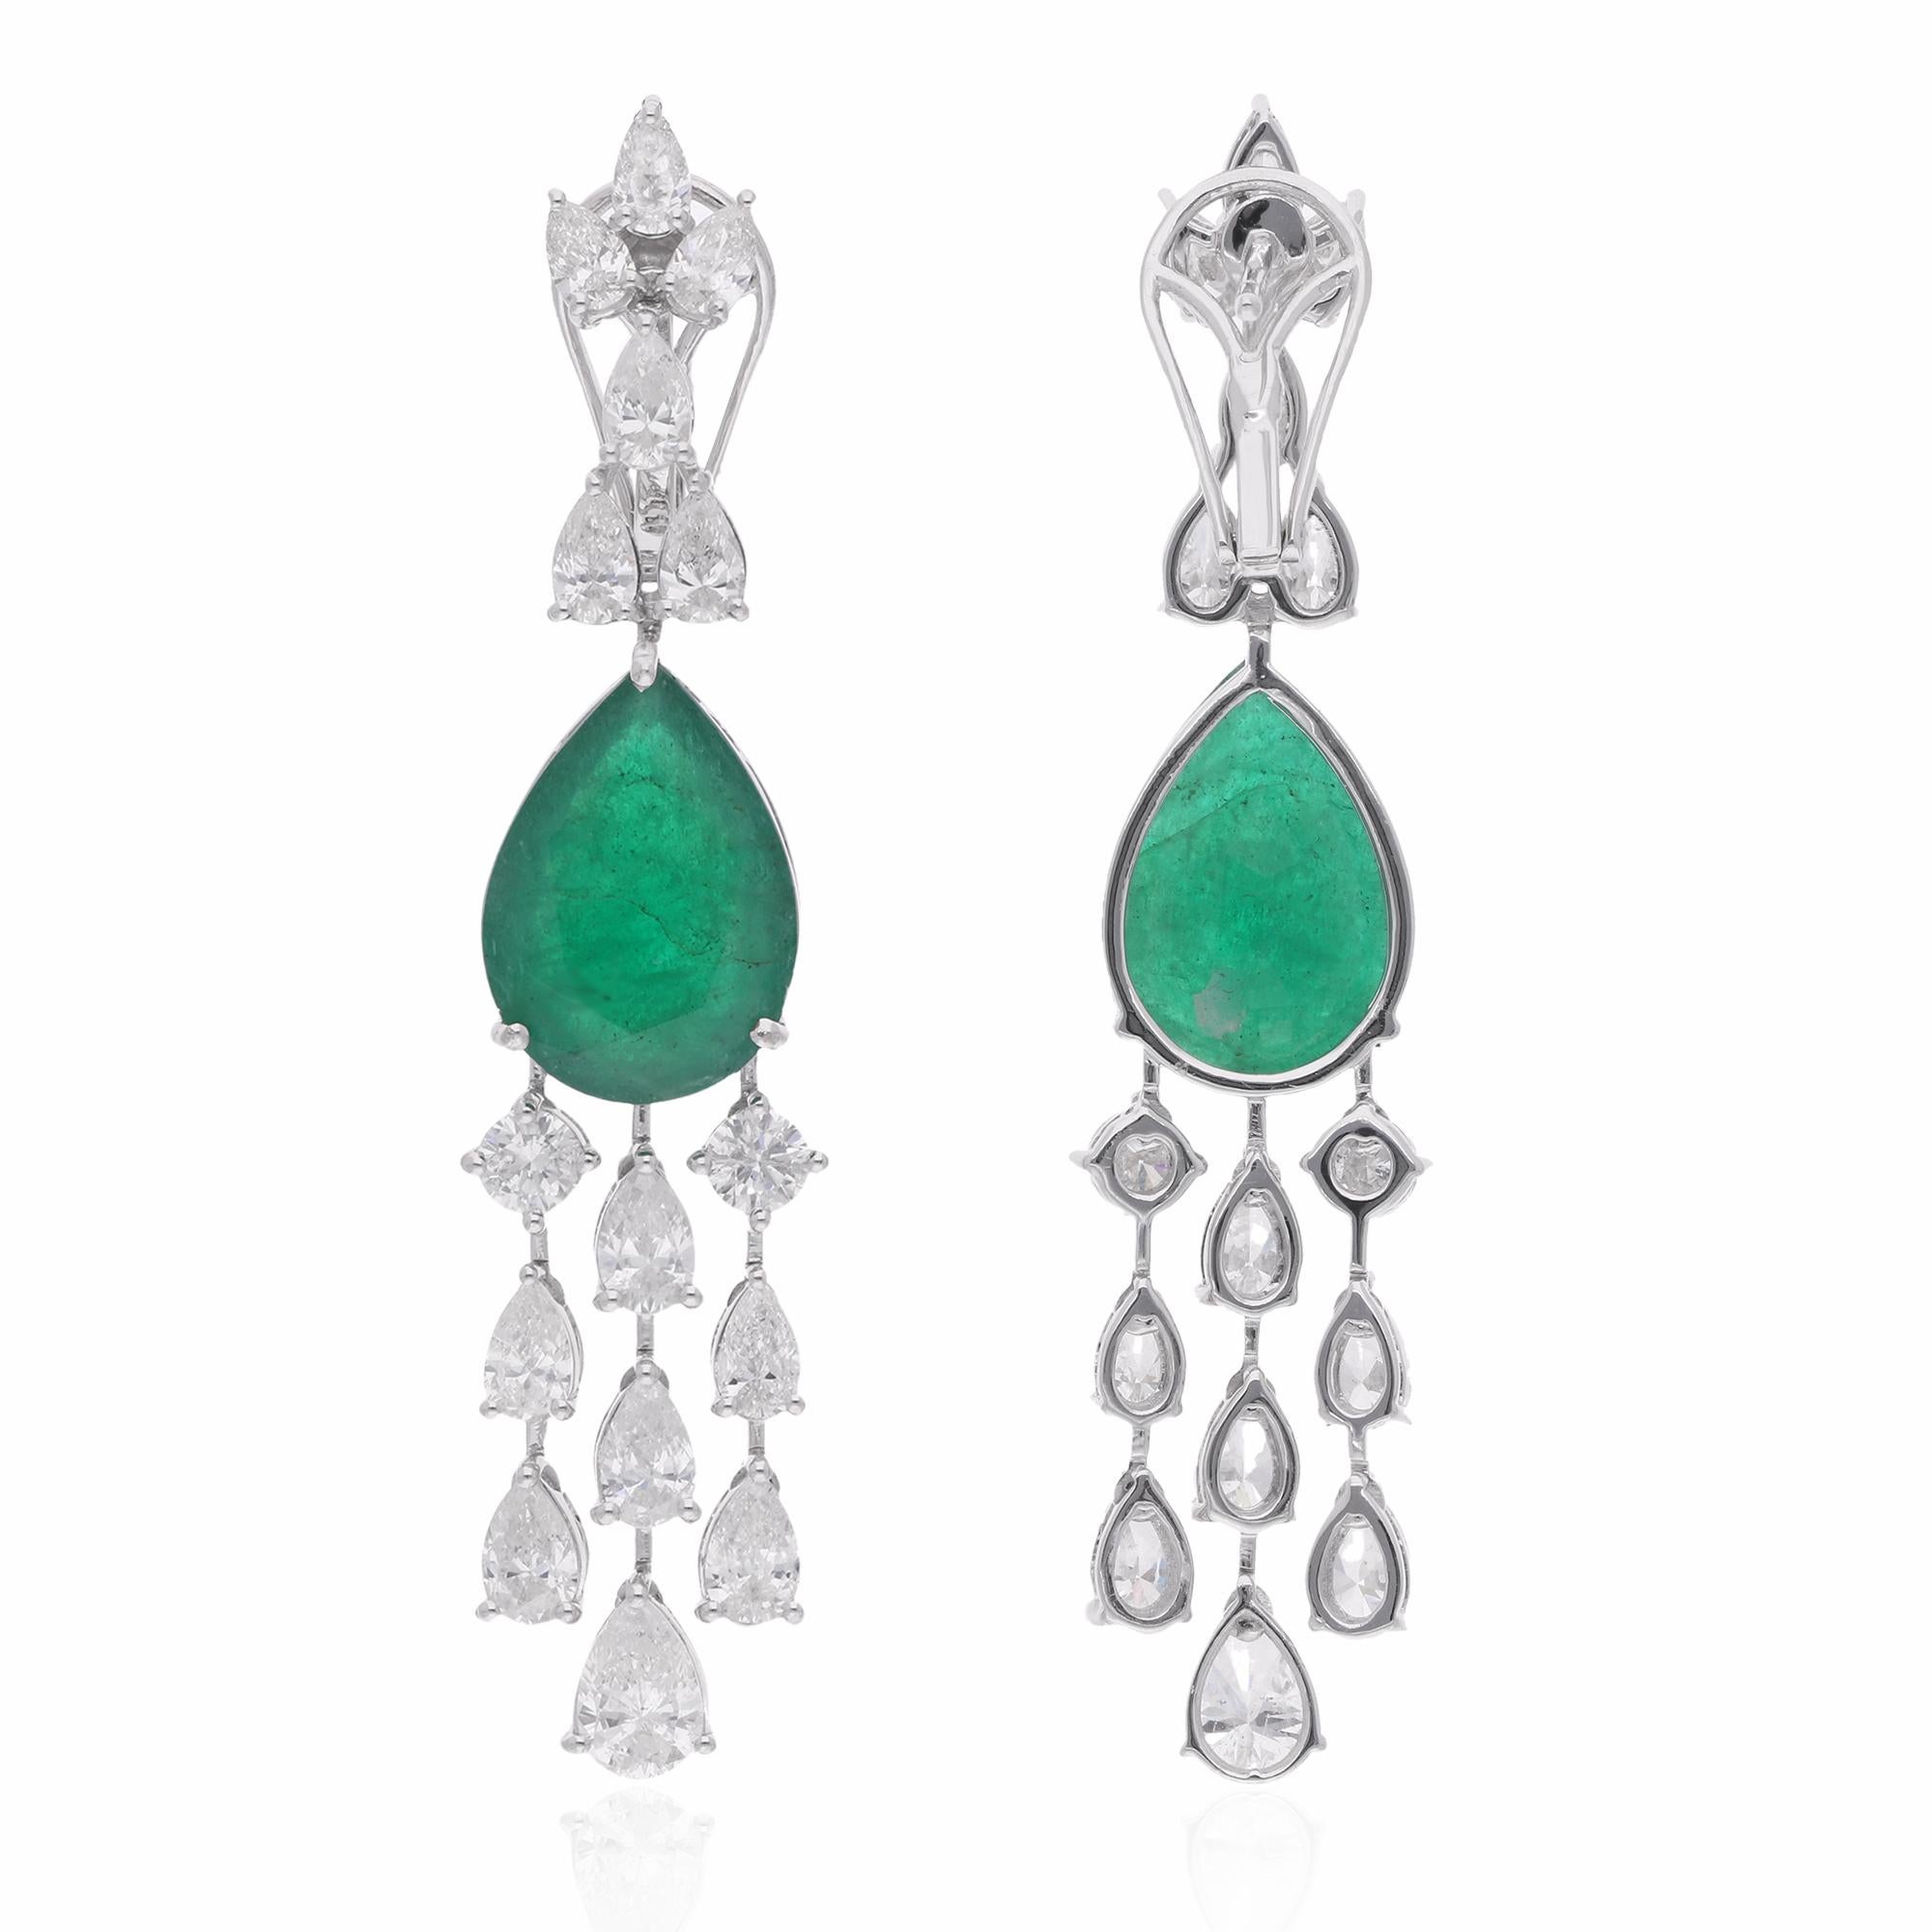 Elevate your elegance with the enchanting beauty of these Pear Zambian Emerald Gemstone Chandelier Earrings, embellished with sparkling Diamonds and meticulously crafted in luxurious 18 Karat White Gold. These exquisite earrings are a celebration of